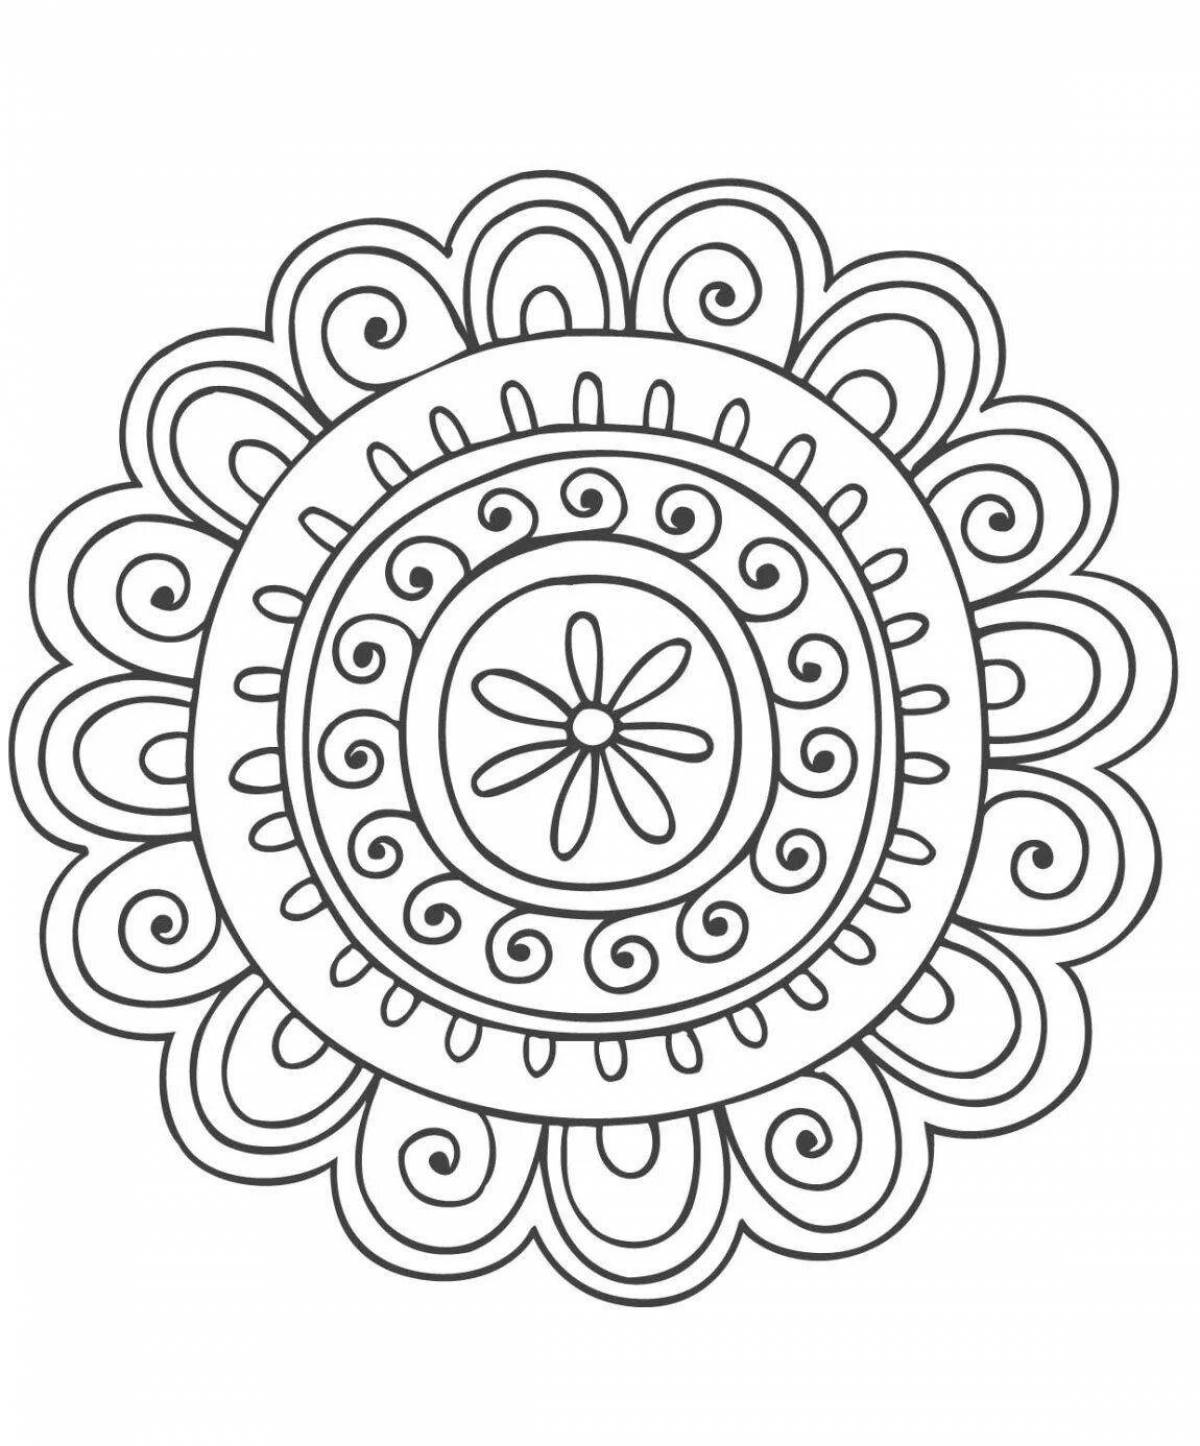 Coloring page mysterious tatar patterns